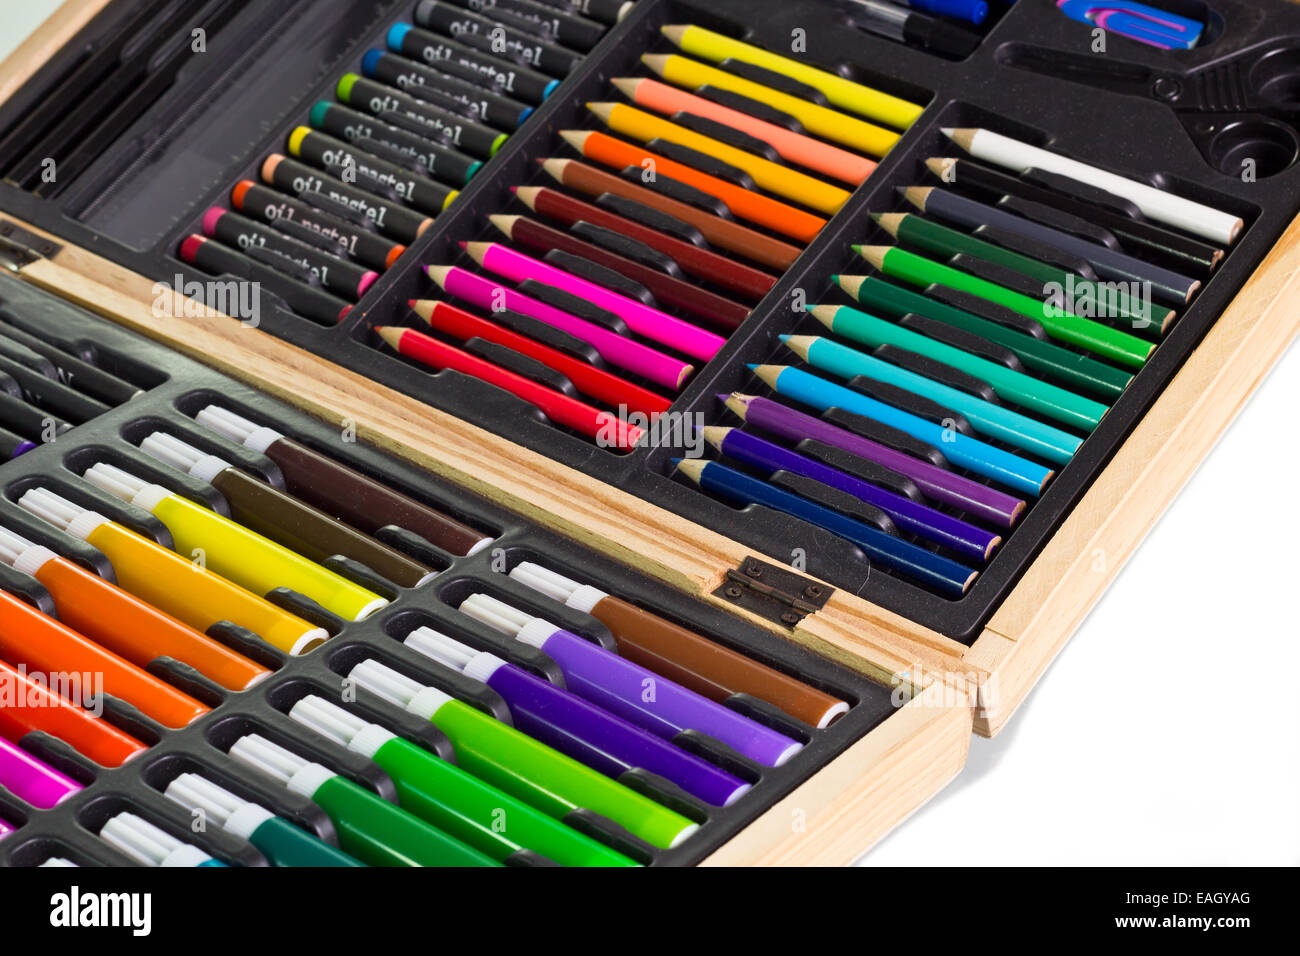 https://c8.alamy.com/comp/EAGYAG/colored-pencils-drawing-materials-in-plywood-box-isolated-on-white-EAGYAG.jpg